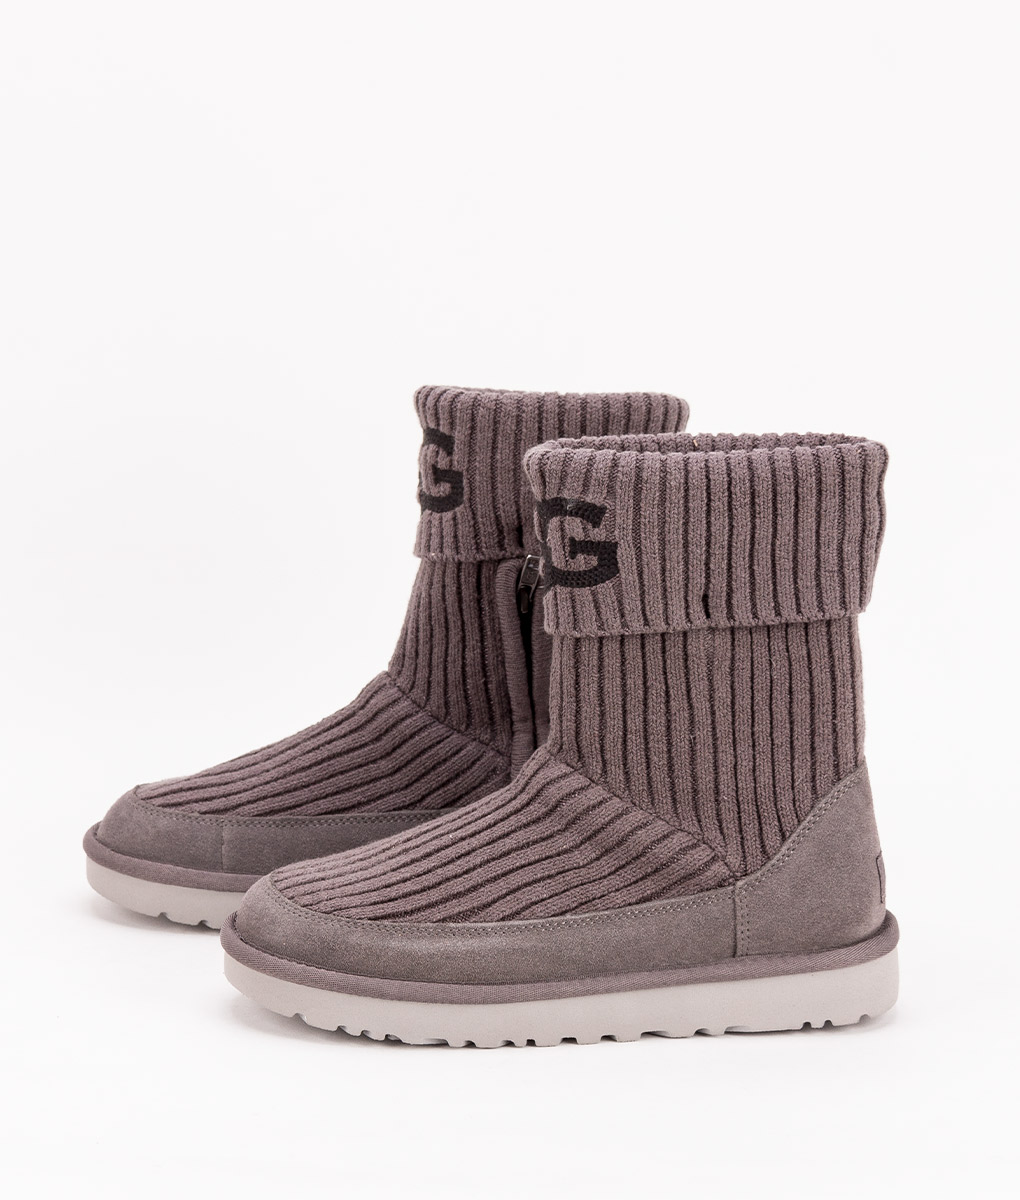 ugg knit boot